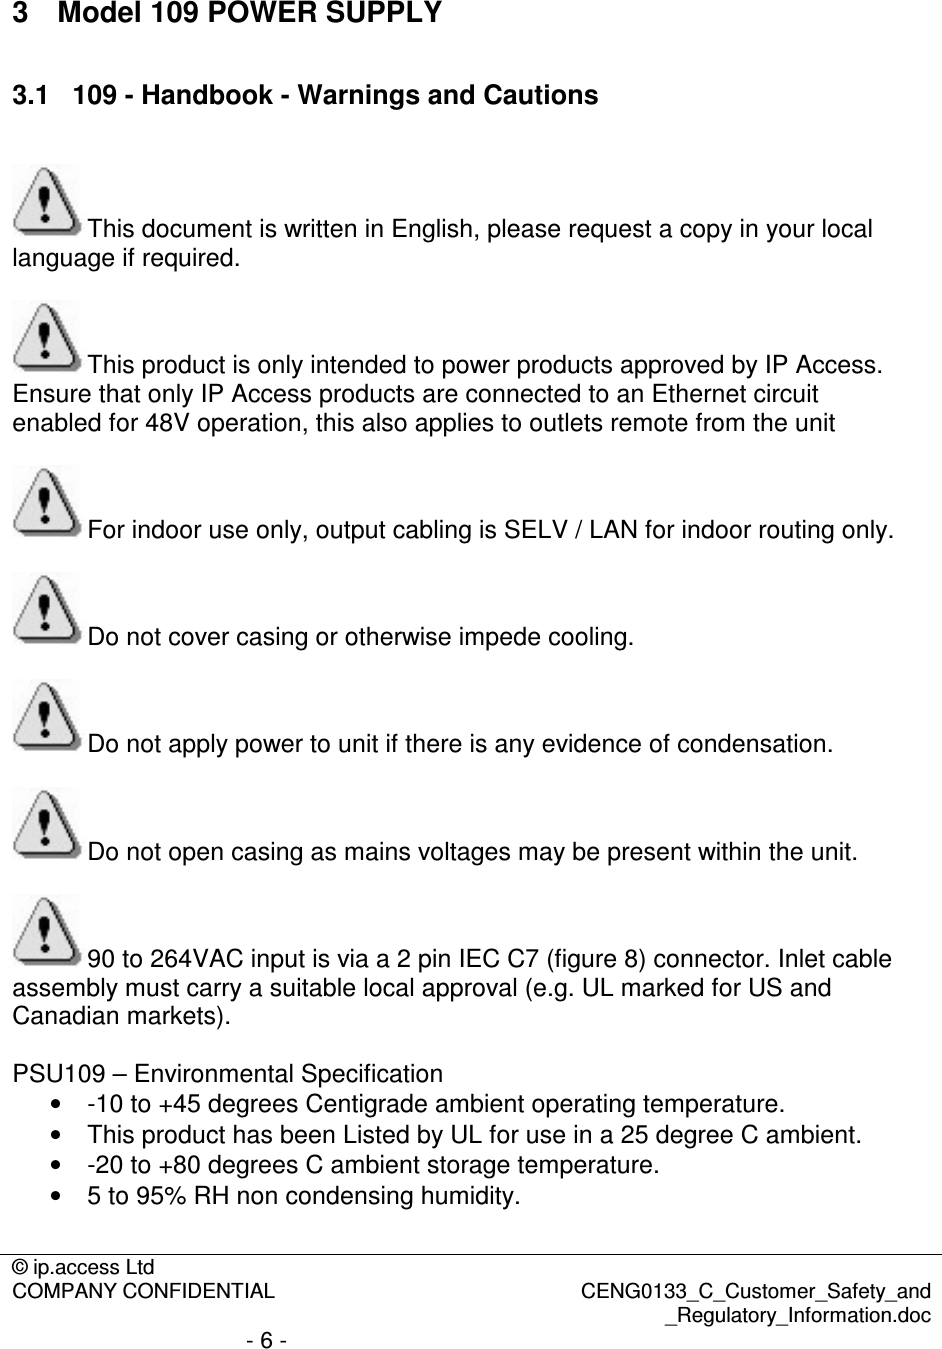 © ip.access Ltd  COMPANY CONFIDENTIAL  CENG0133_C_Customer_Safety_and _Regulatory_Information.doc - 6 -   3  Model 109 POWER SUPPLY 3.1  109 - Handbook - Warnings and Cautions  This document is written in English, please request a copy in your local language if required.  This product is only intended to power products approved by IP Access. Ensure that only IP Access products are connected to an Ethernet circuit enabled for 48V operation, this also applies to outlets remote from the unit  For indoor use only, output cabling is SELV / LAN for indoor routing only.  Do not cover casing or otherwise impede cooling.  Do not apply power to unit if there is any evidence of condensation.  Do not open casing as mains voltages may be present within the unit.  90 to 264VAC input is via a 2 pin IEC C7 (figure 8) connector. Inlet cable assembly must carry a suitable local approval (e.g. UL marked for US and Canadian markets).   PSU109 – Environmental Specification •  -10 to +45 degrees Centigrade ambient operating temperature. •  This product has been Listed by UL for use in a 25 degree C ambient. •  -20 to +80 degrees C ambient storage temperature. •  5 to 95% RH non condensing humidity.  